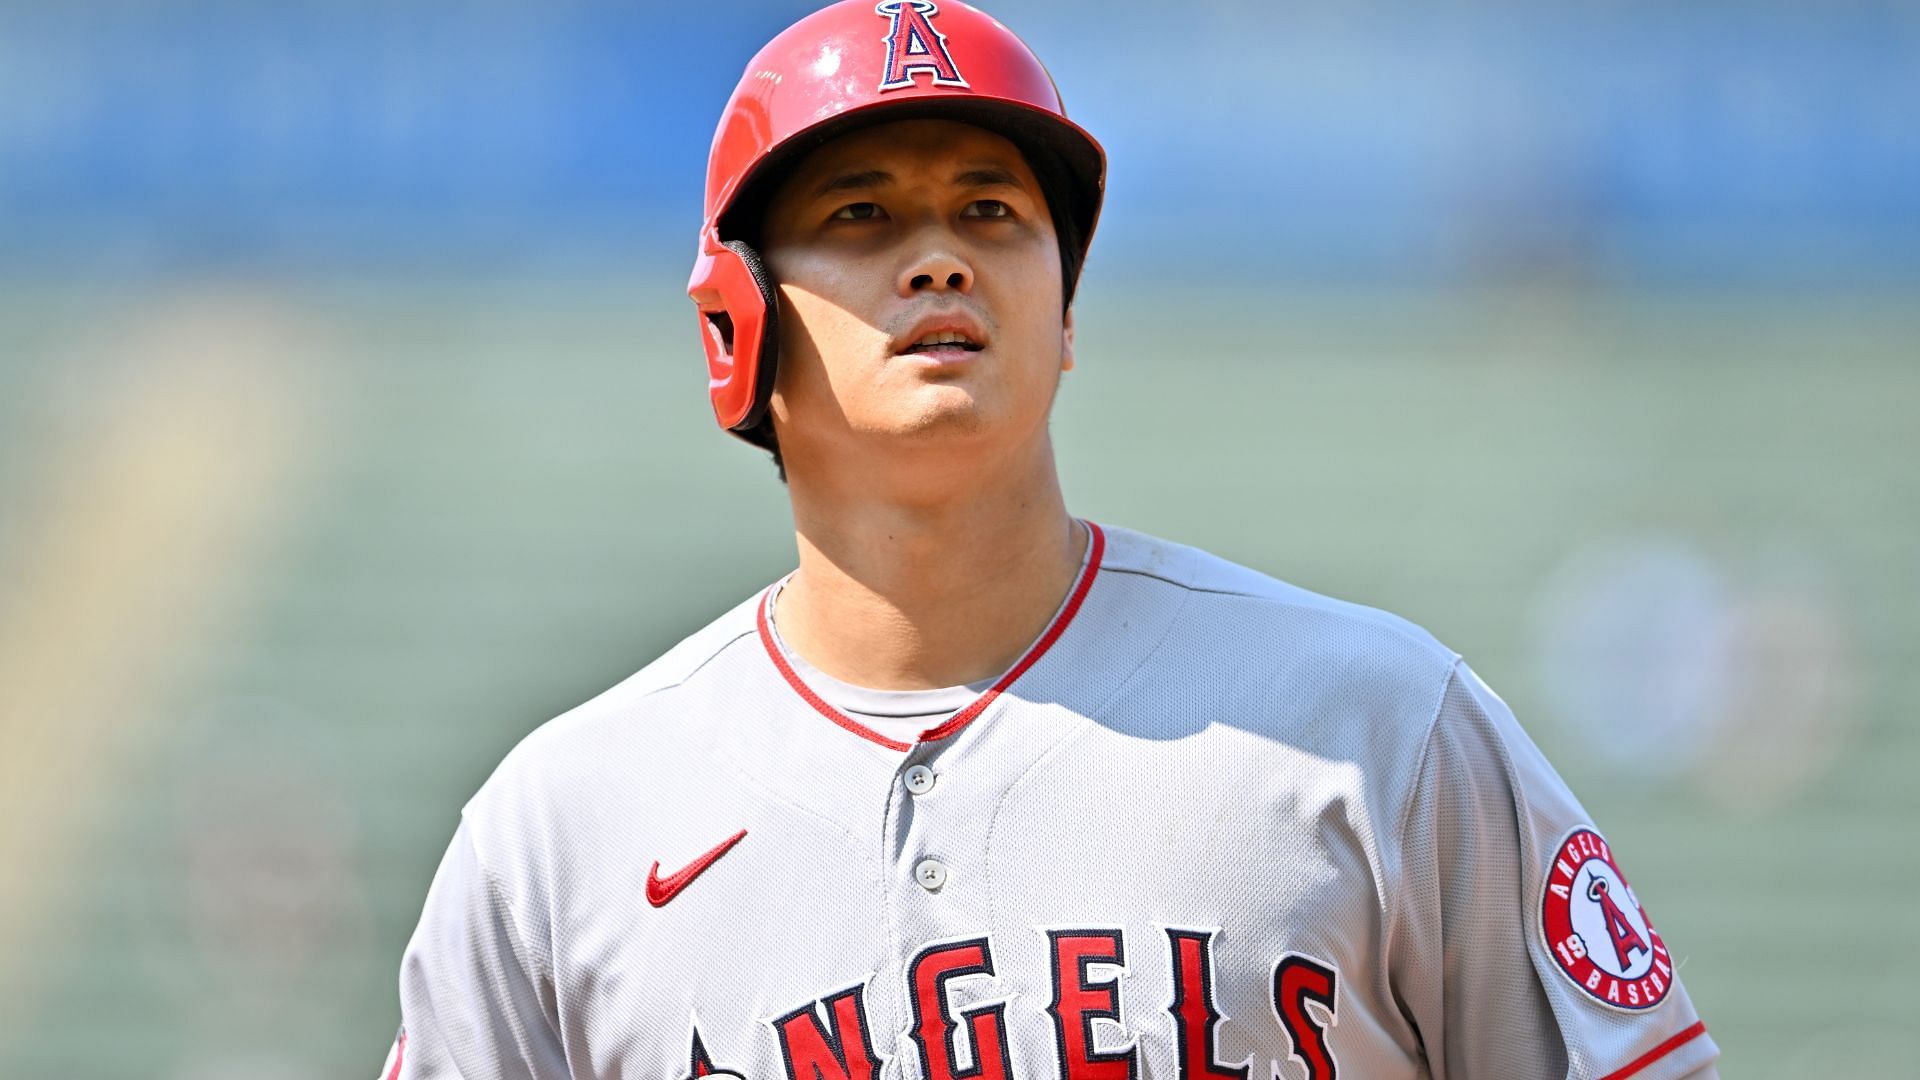 Ohtani has been one of the best players in recent history alongside Mike Trout for the Angels.